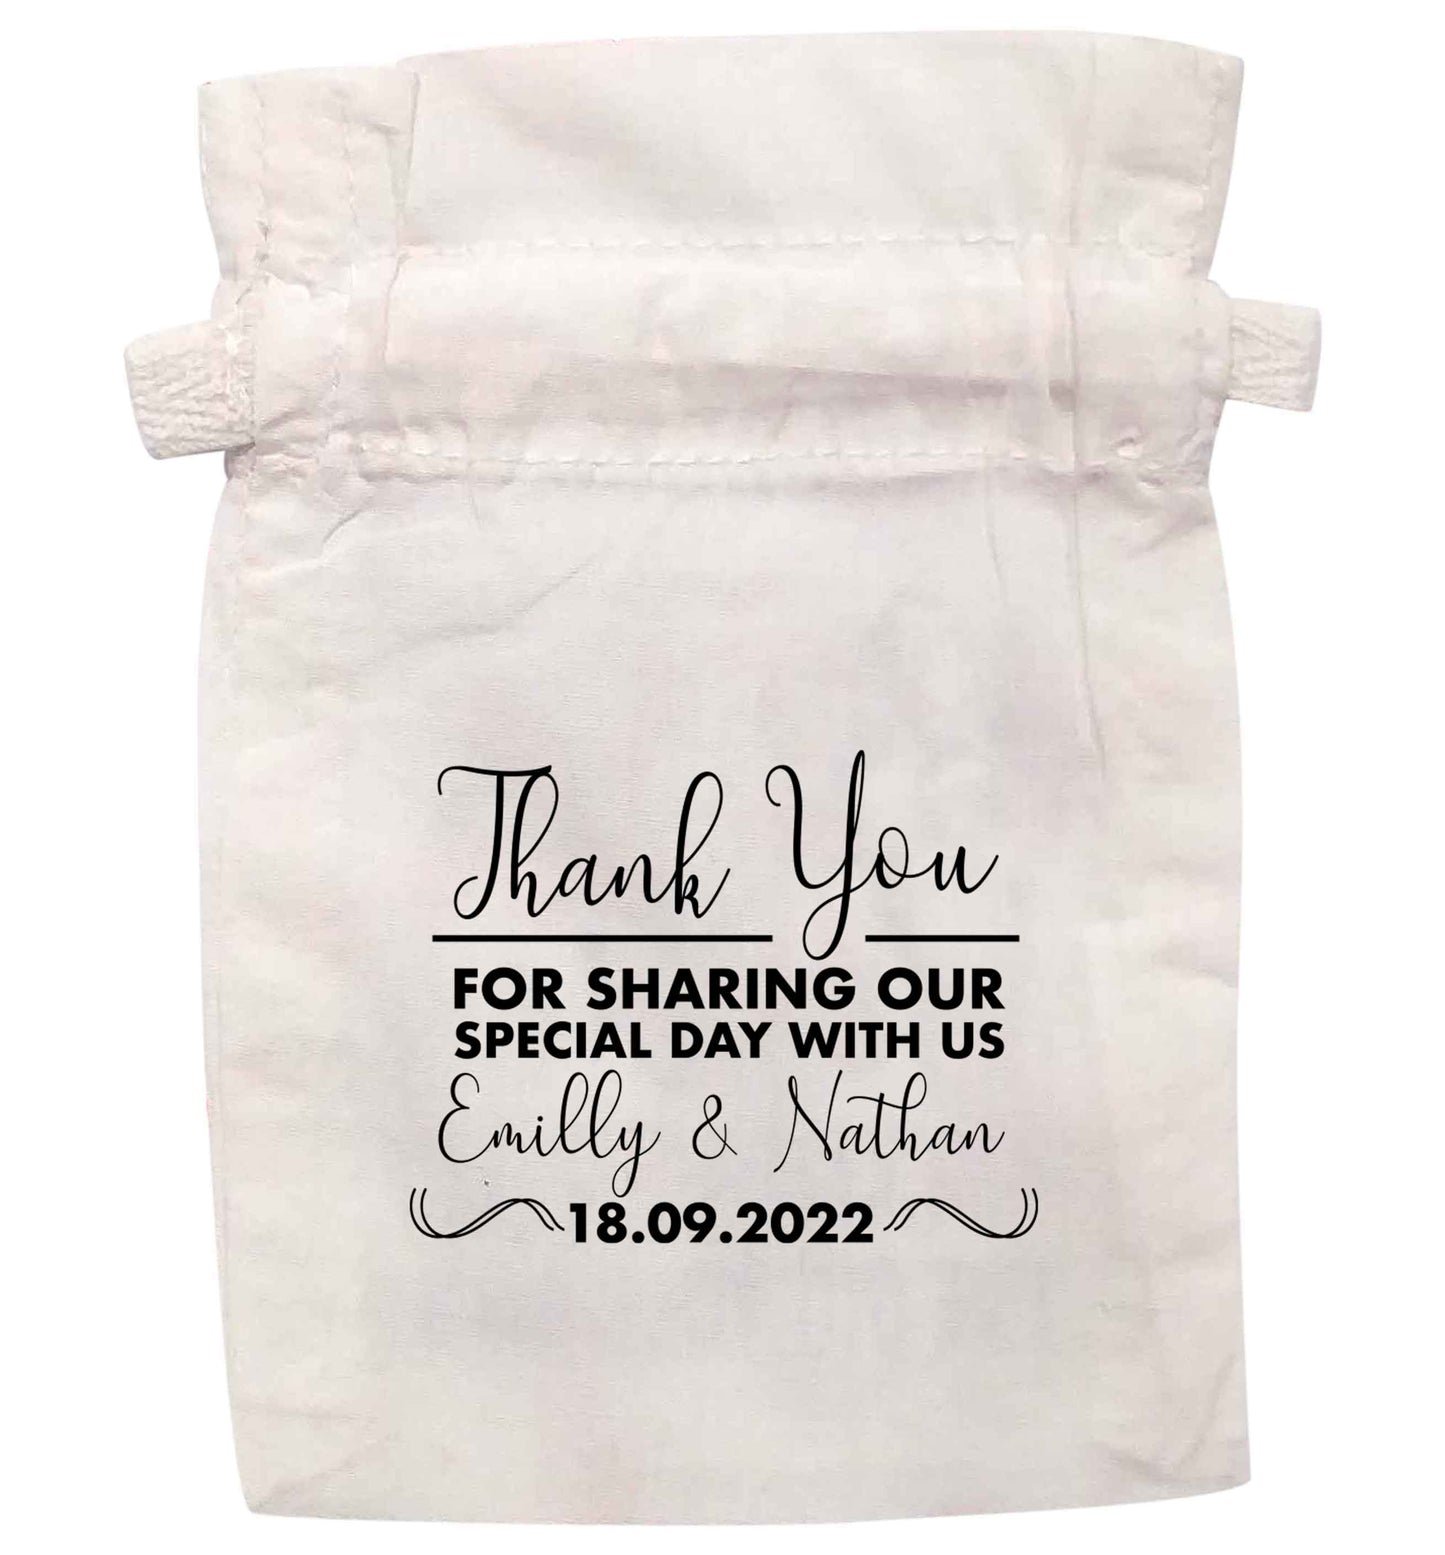 Thank you for sharing our special day | XS - L | Pouch / Drawstring bag / Sack | Organic Cotton | Bulk discounts available!